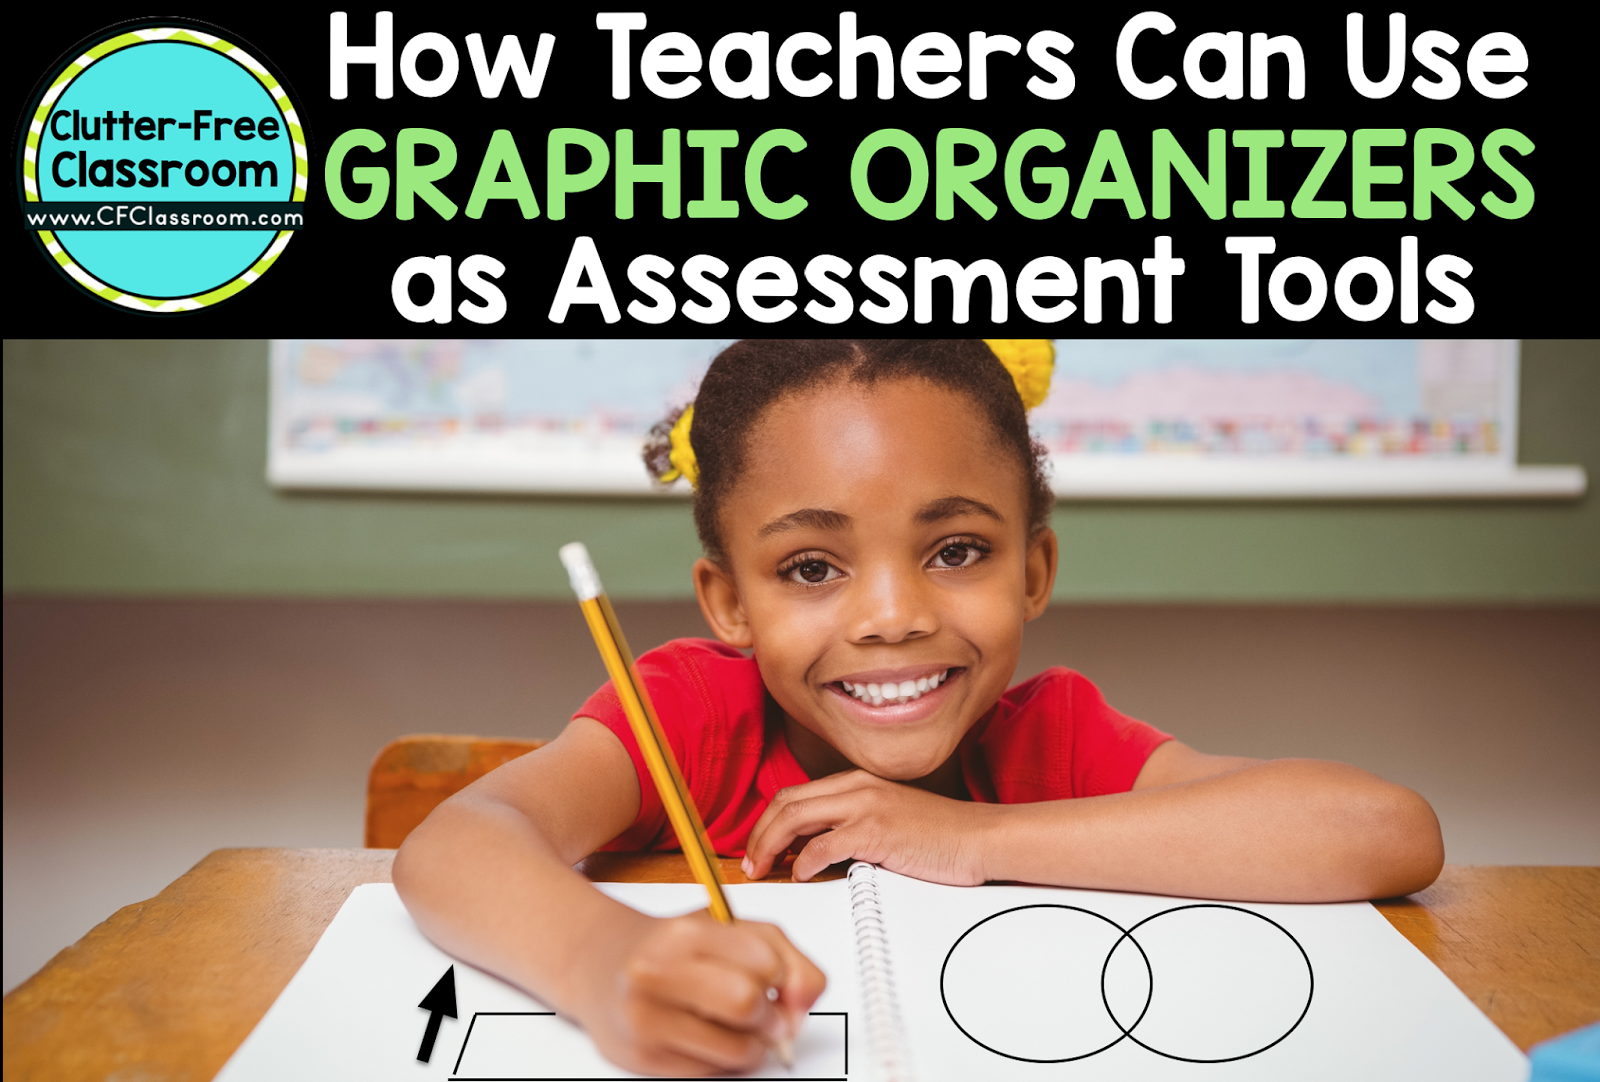 This post by The Clutter-Free Classroom shares why using graphic organizers for assessment is important and will provide teachers with easy ways to offer students differentiated assessment tasks.